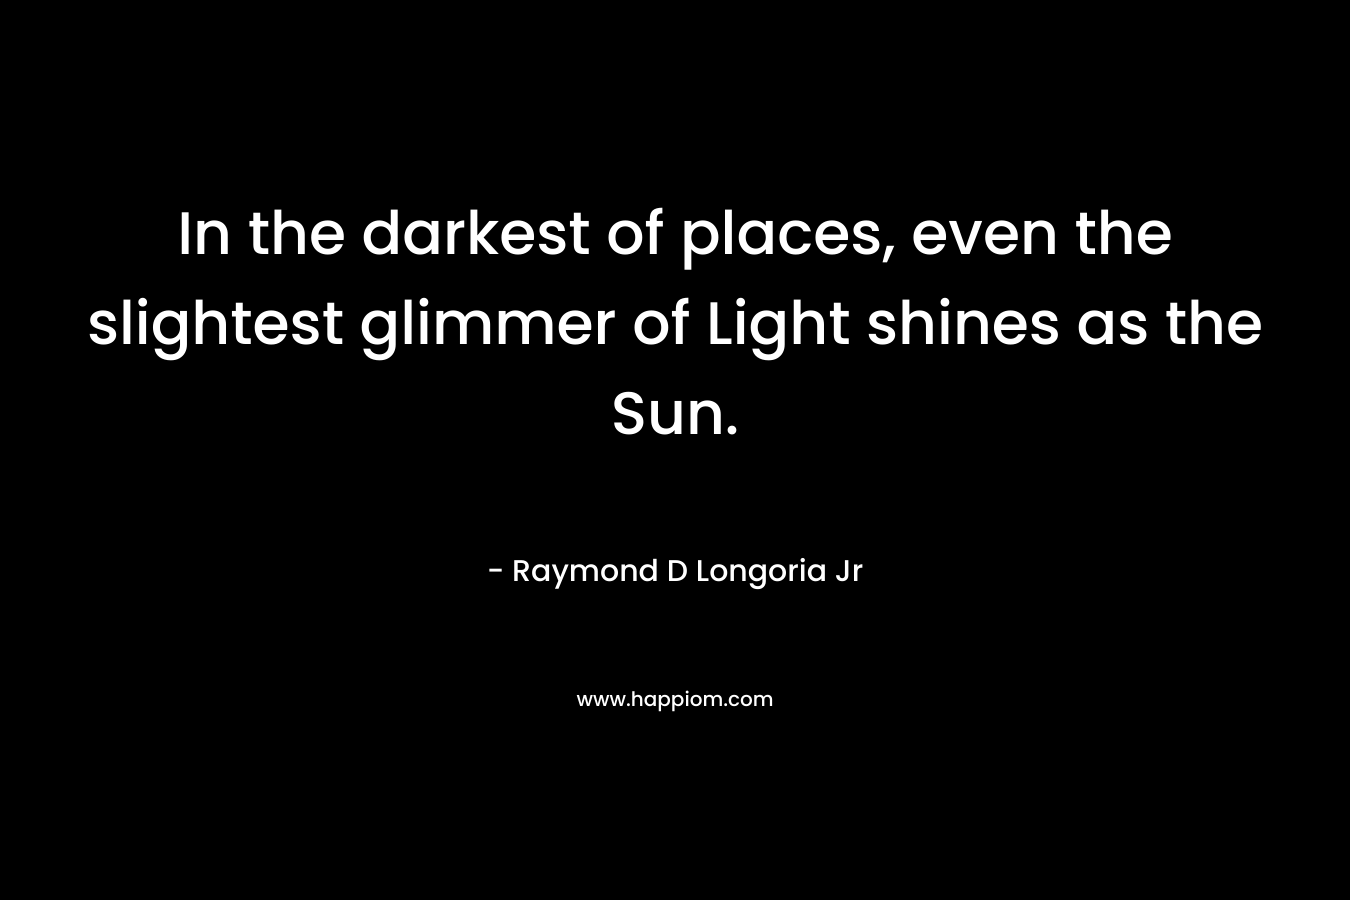 In the darkest of places, even the slightest glimmer of Light shines as the Sun. – Raymond D Longoria Jr